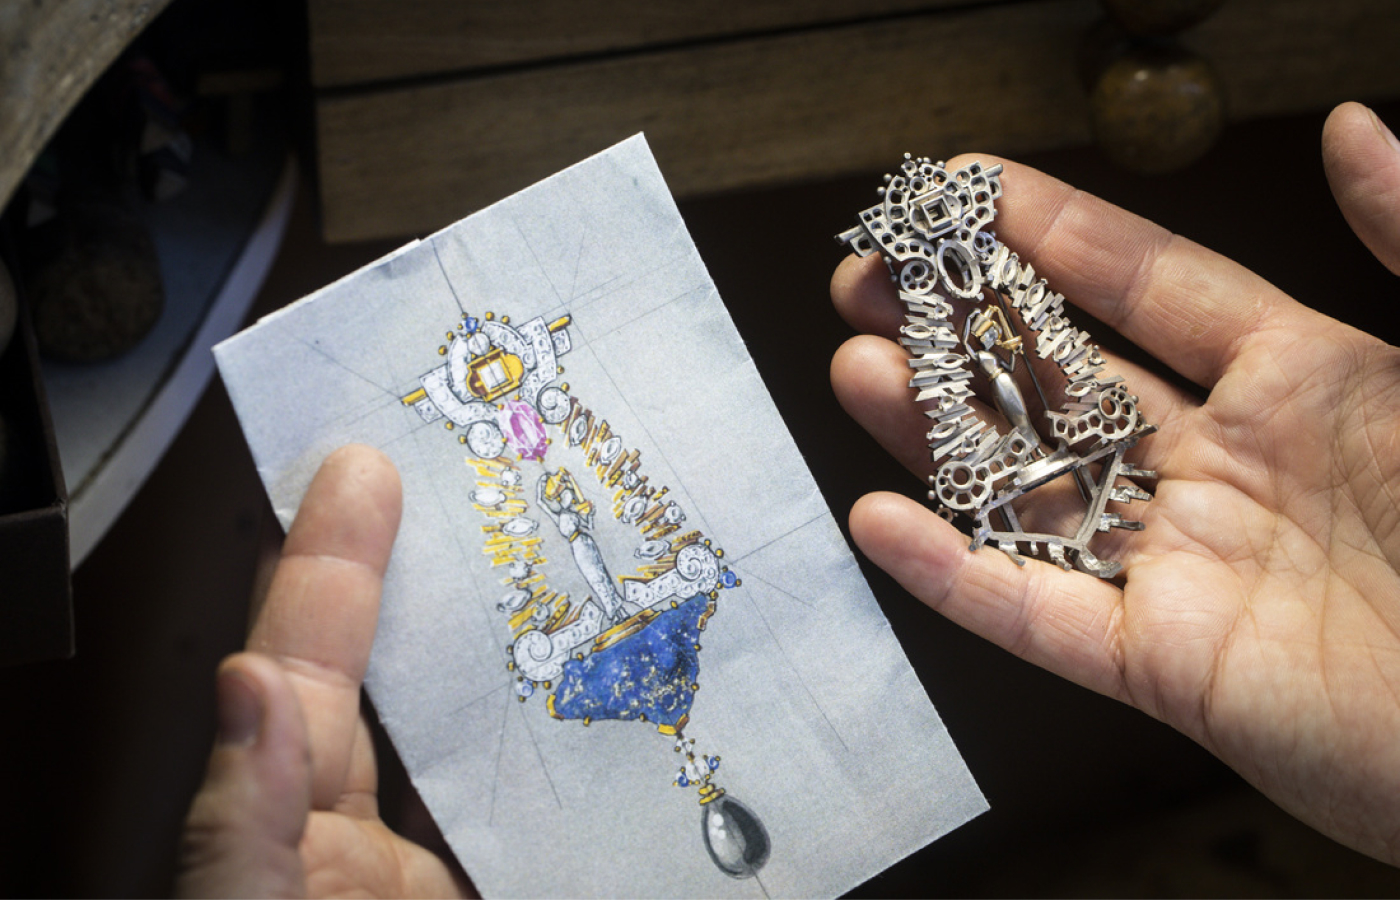 Designing and crafting the Van Cleef & Arpels Dea Eterna clip in gold, white gold, rose gold, featuring a 3.47-ct oval-cut pink sapphire, blue sapphires, lapis lazuli, gray cultured pearl and diamonds from Le Grand Tour High Jewellery Collection